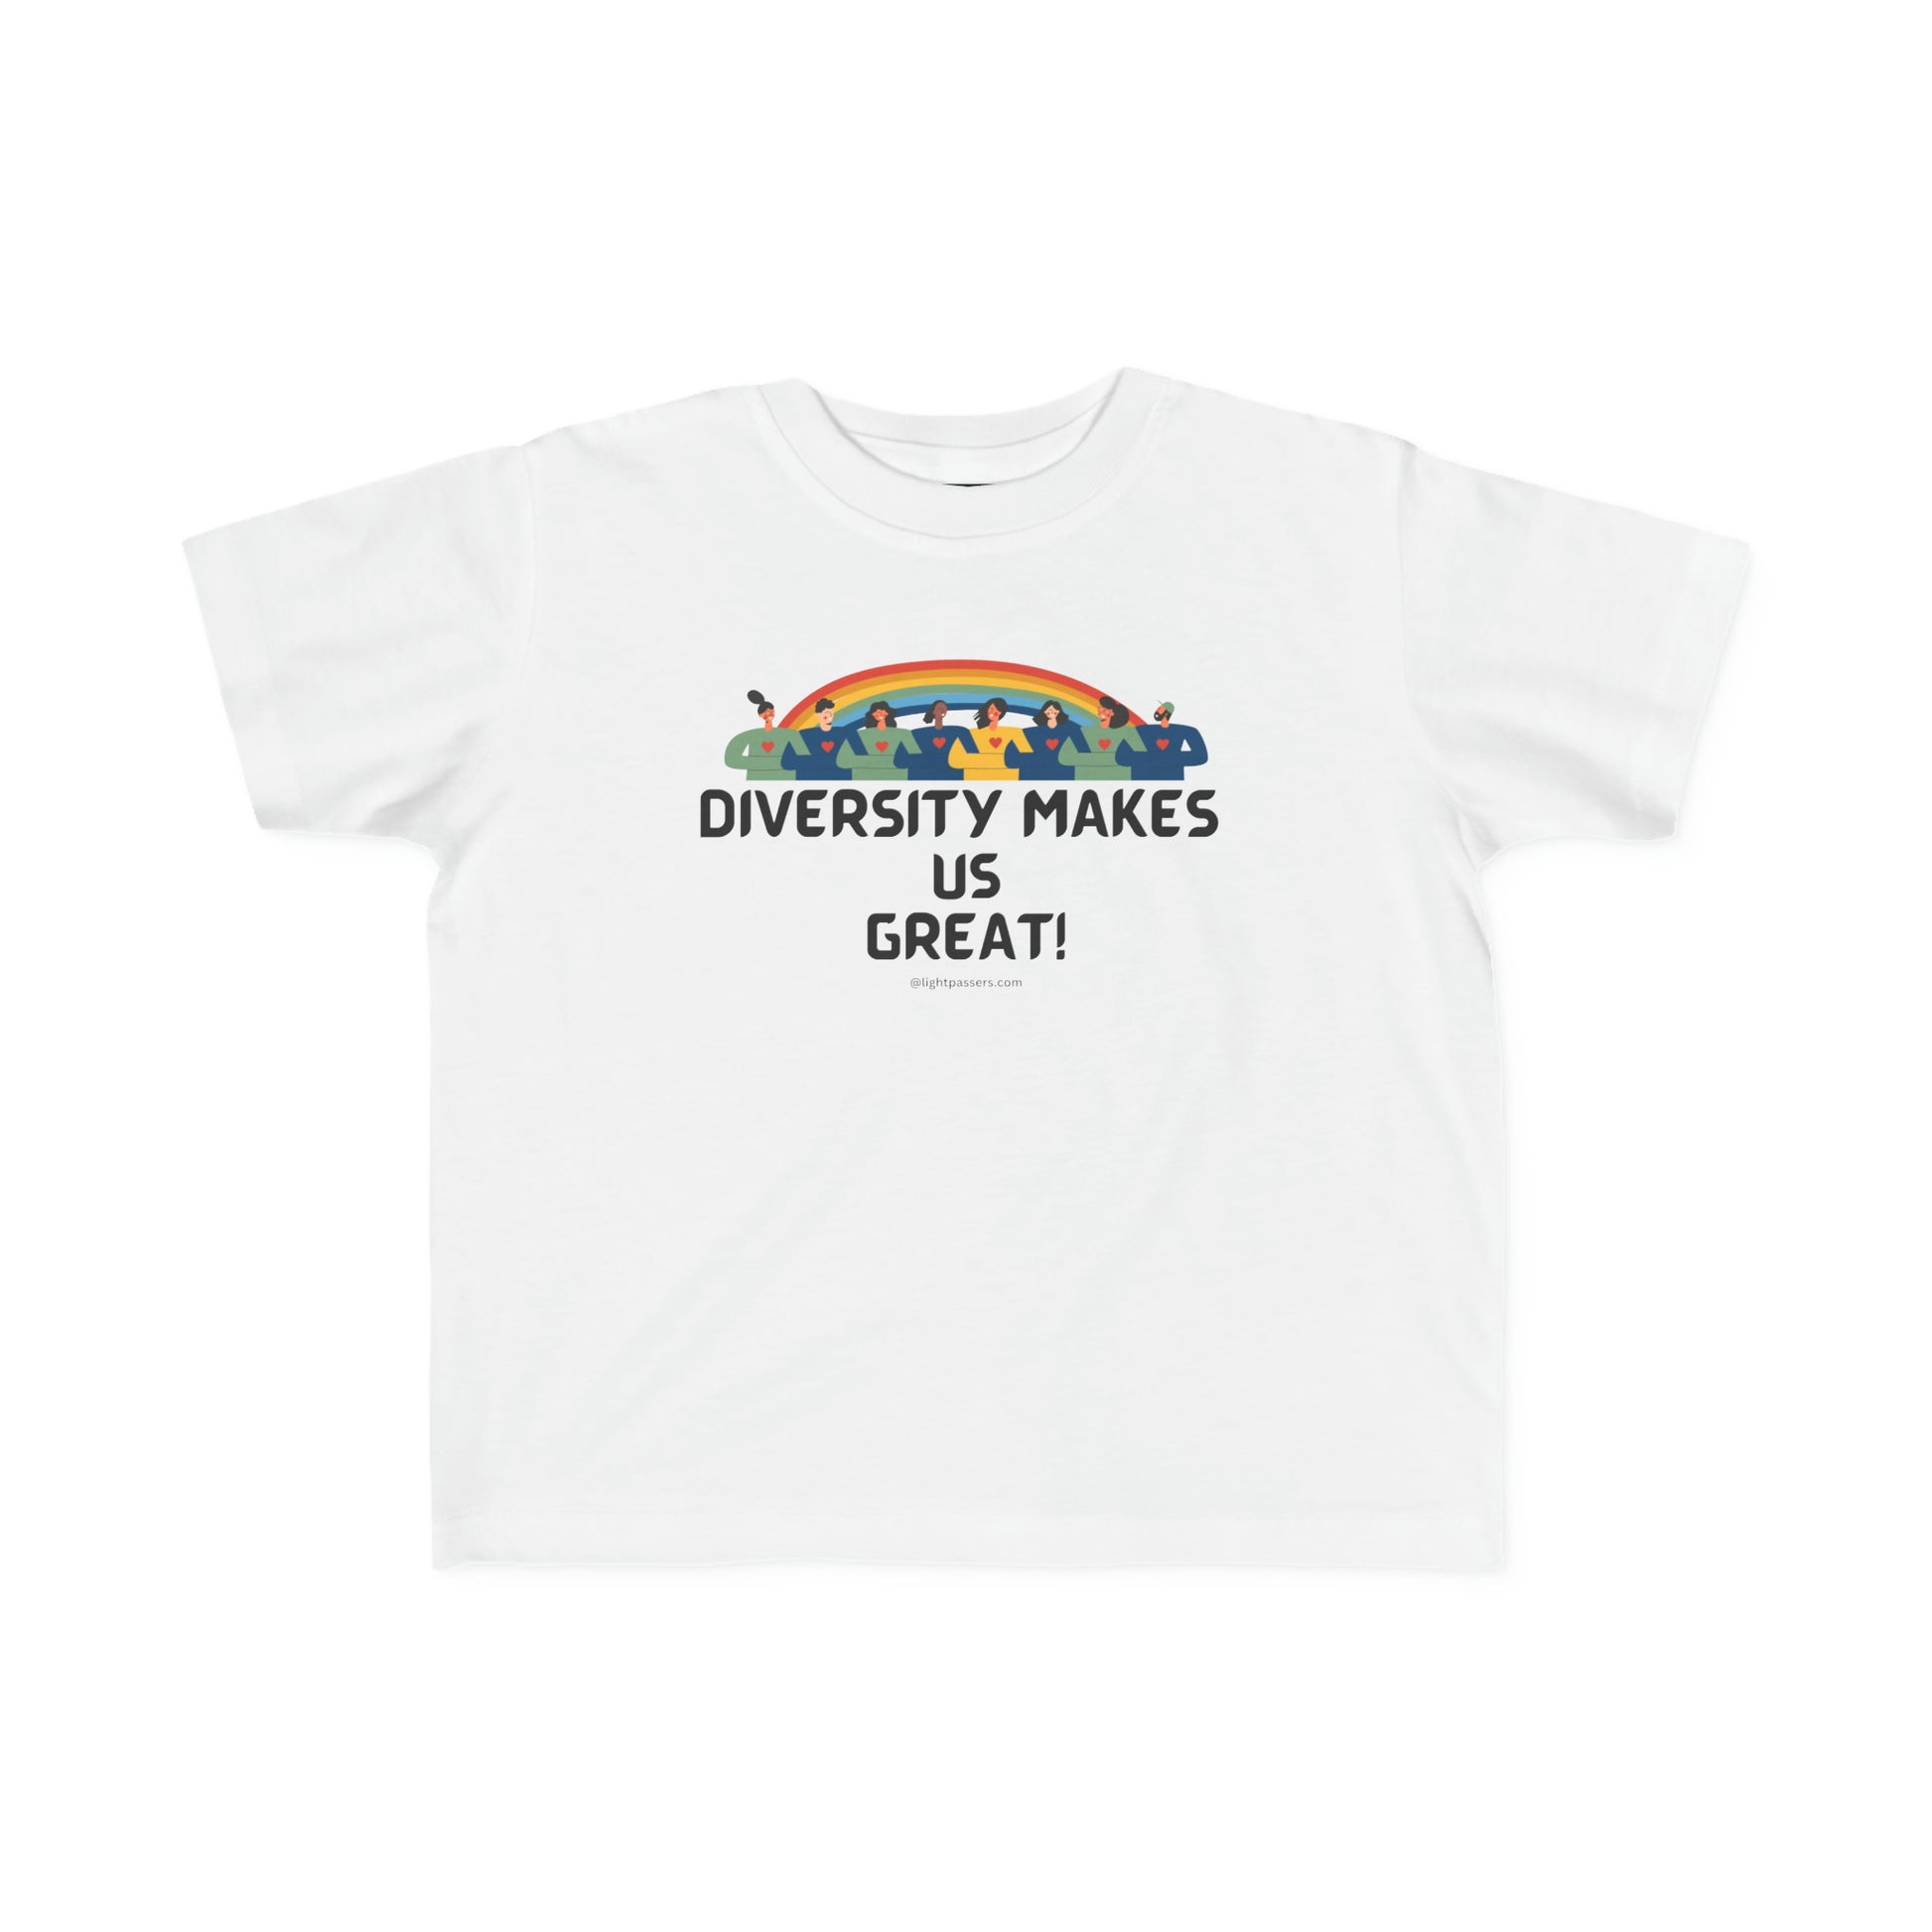 Toddler t-shirt featuring a diverse group of people on a white background. Made of soft, 100% combed cotton with a durable print. Classic fit, tear-away label, and lightweight fabric.